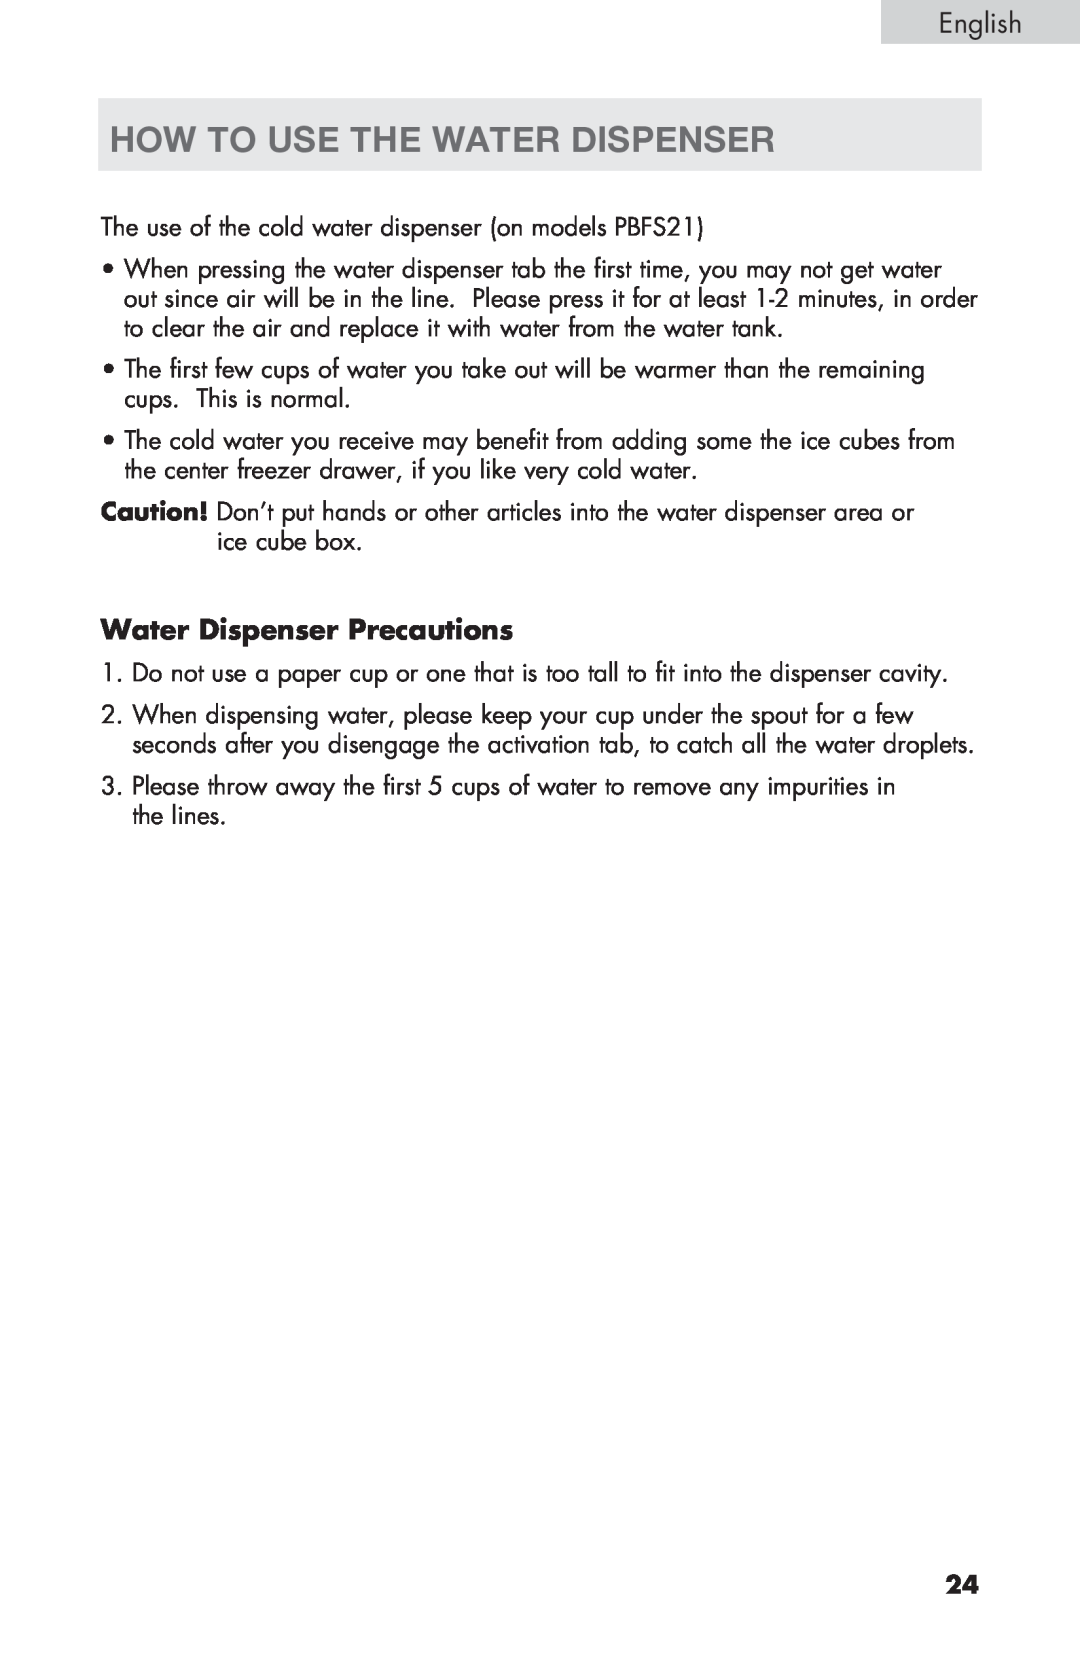 Haier PRFS25 user manual How to Use the Water Dispenser, Water Dispenser Precautions 